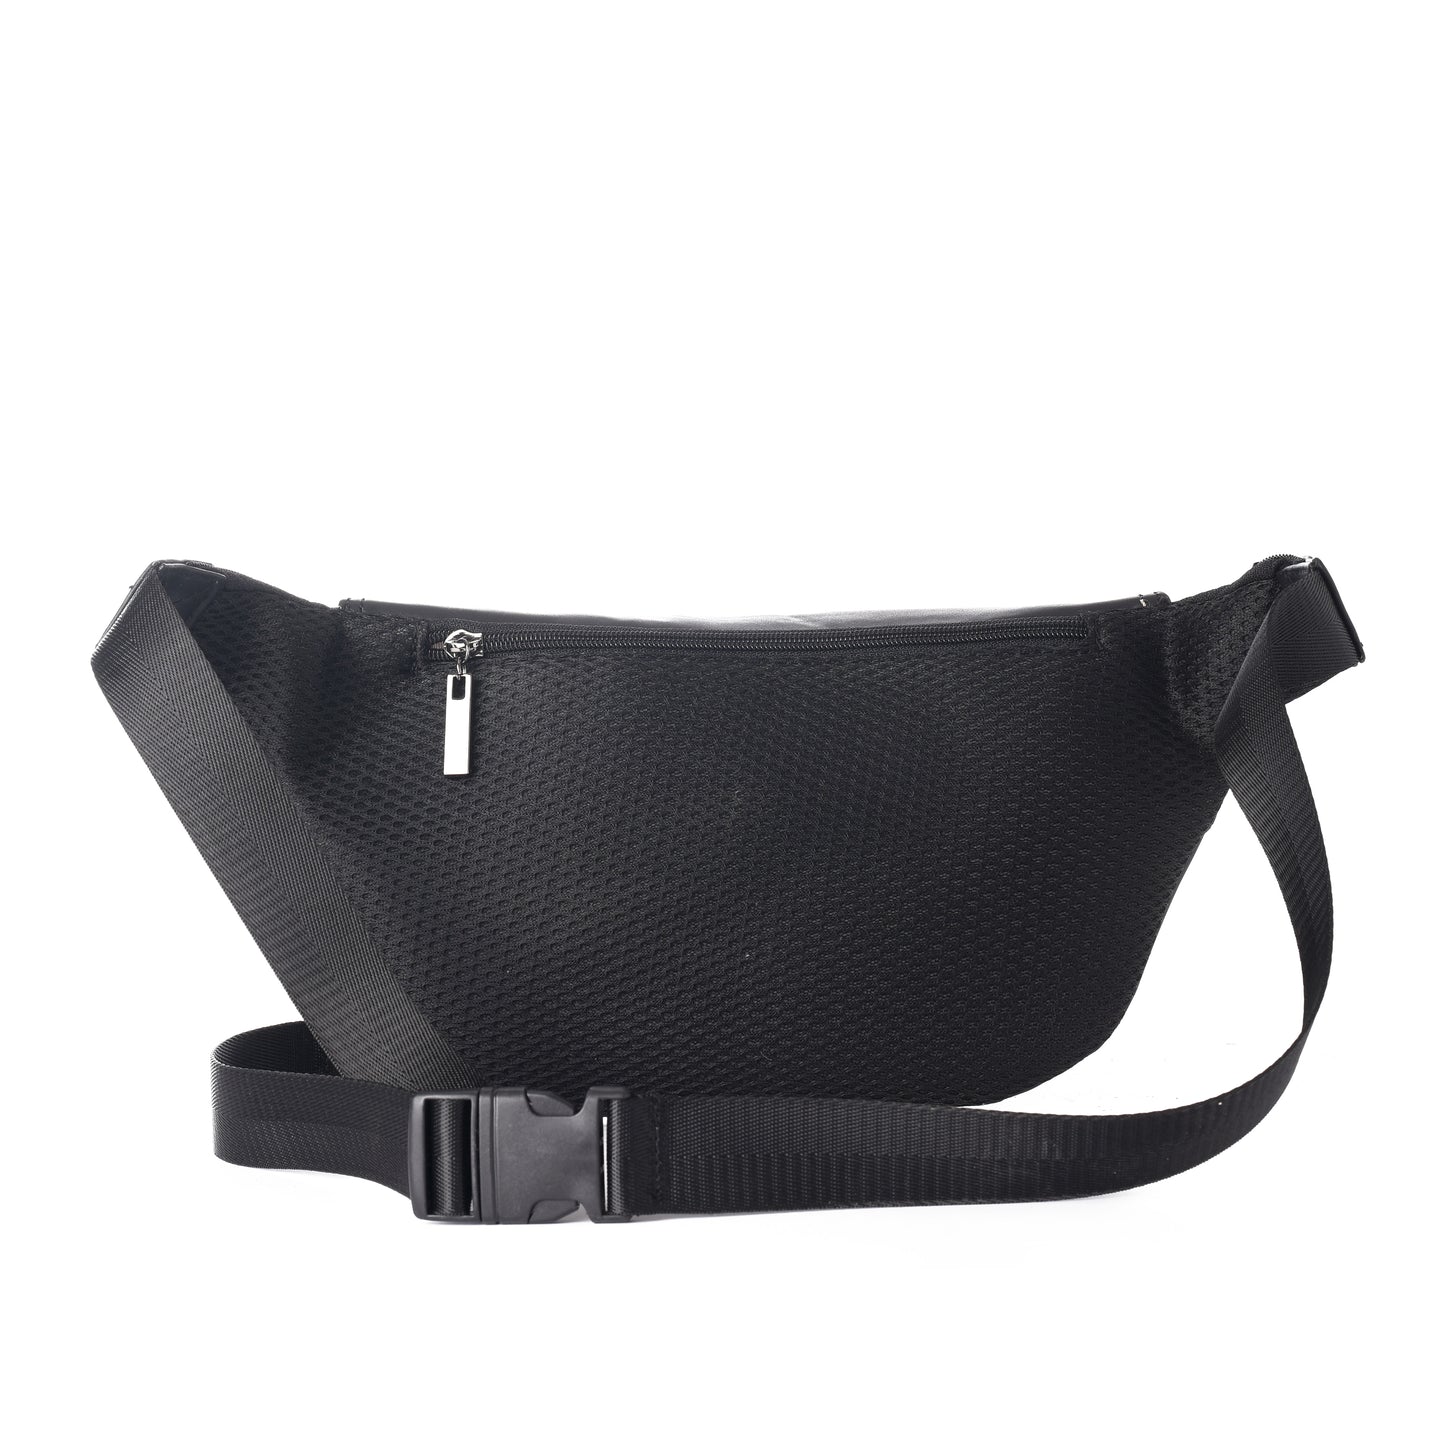 Fanny pack-Black with grey suede